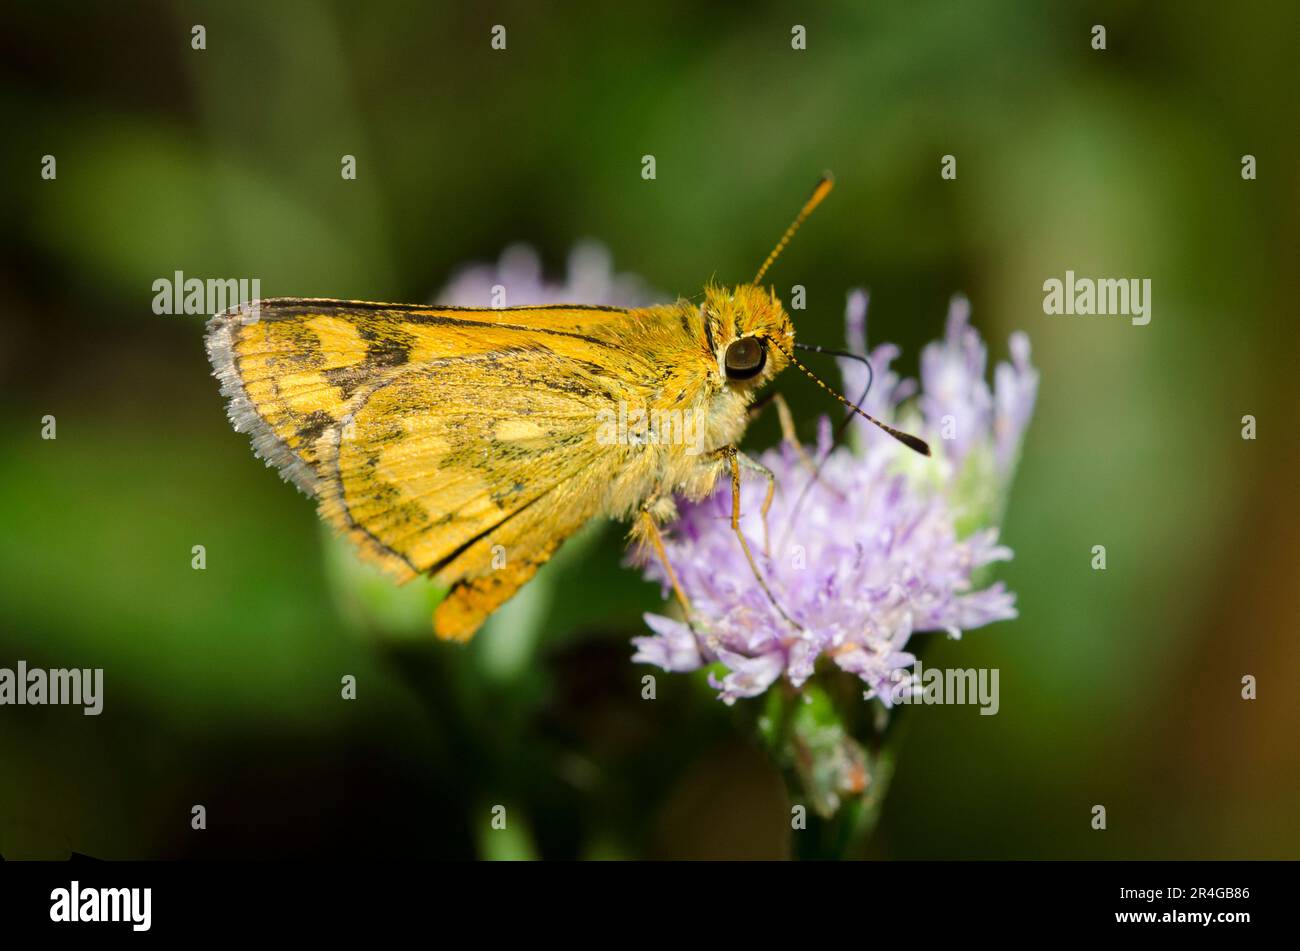 Large Dart, Potanthus serina, with proboscis in Goatweed flower, Ageratum conyzoides, Klungkung, Bali, Indonesia Stock Photo